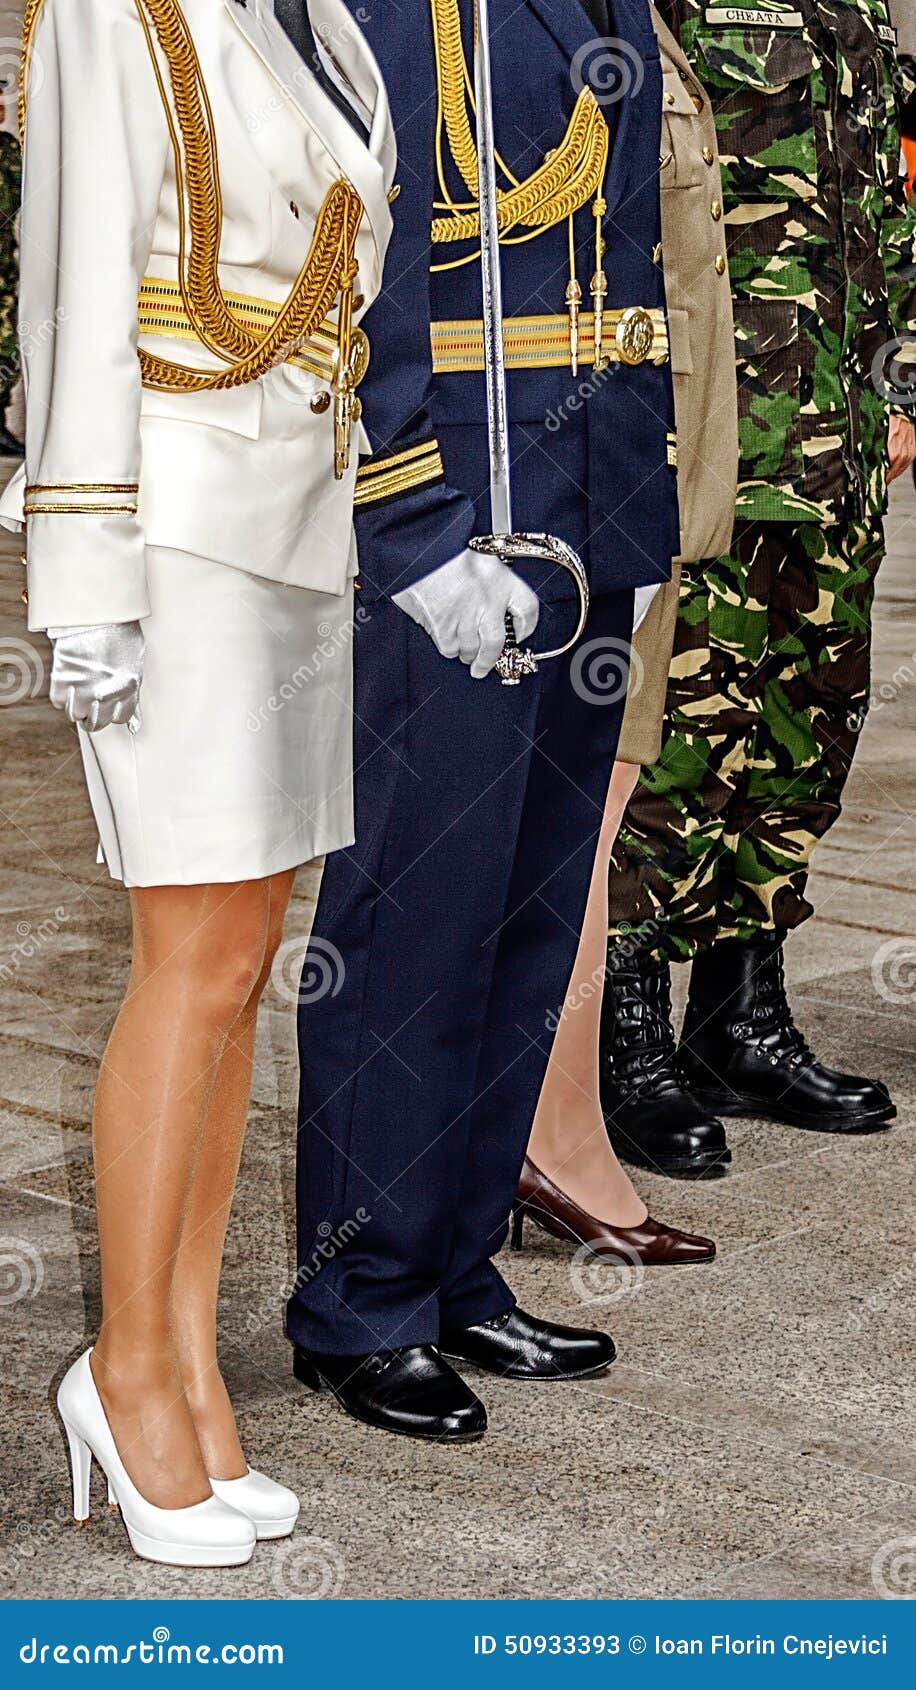 Romanian Military Uniforms 2 Editorial Stock Photo - Image of serve, armed:  50933393